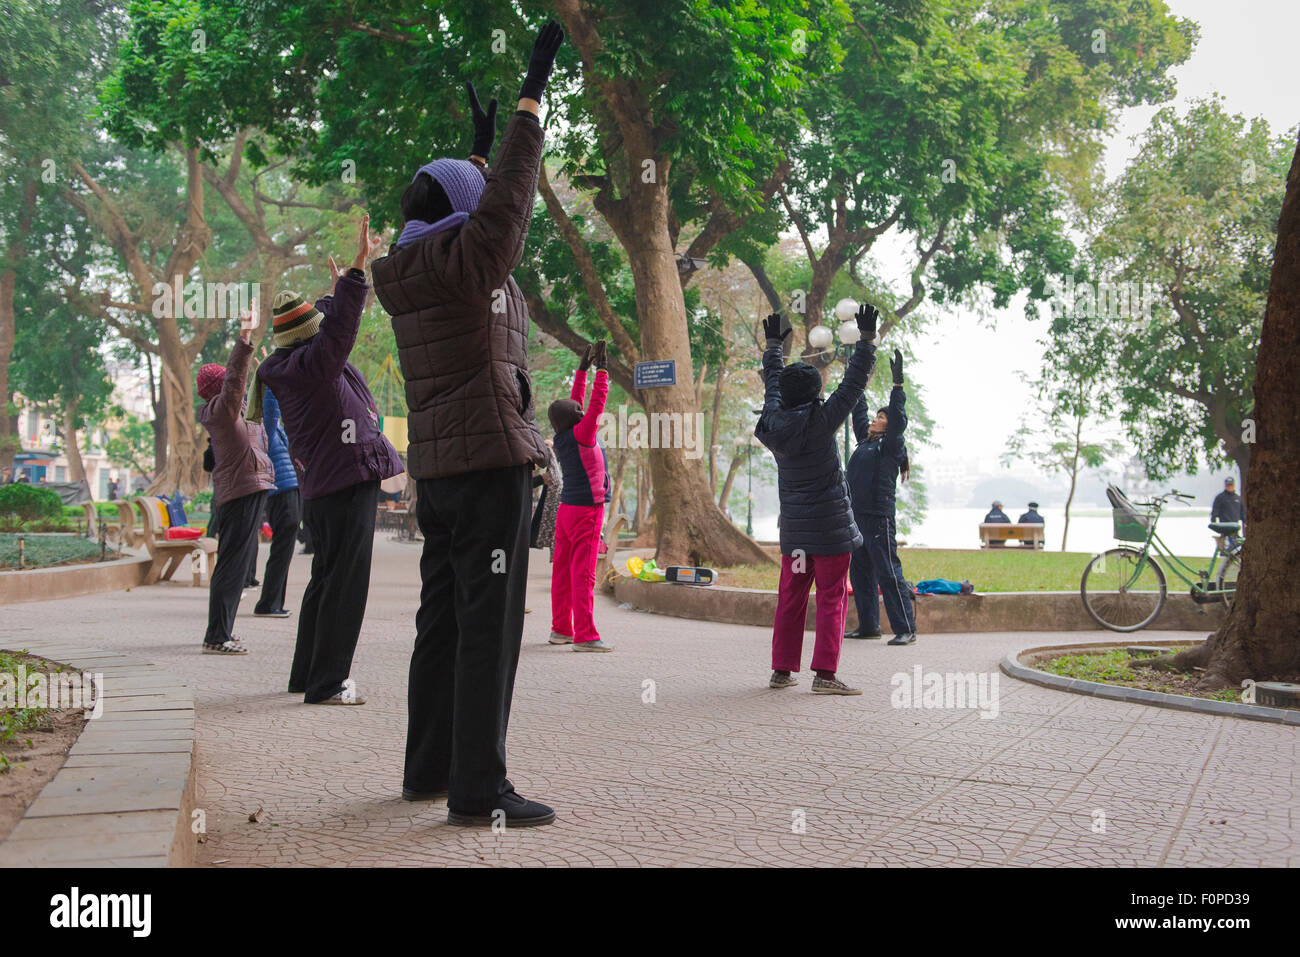 Tai chi park asia, view of middle aged women participating in an early morning tai chi session beside Hoan Kiem Lake in Hanoi, Vietnam. Stock Photo